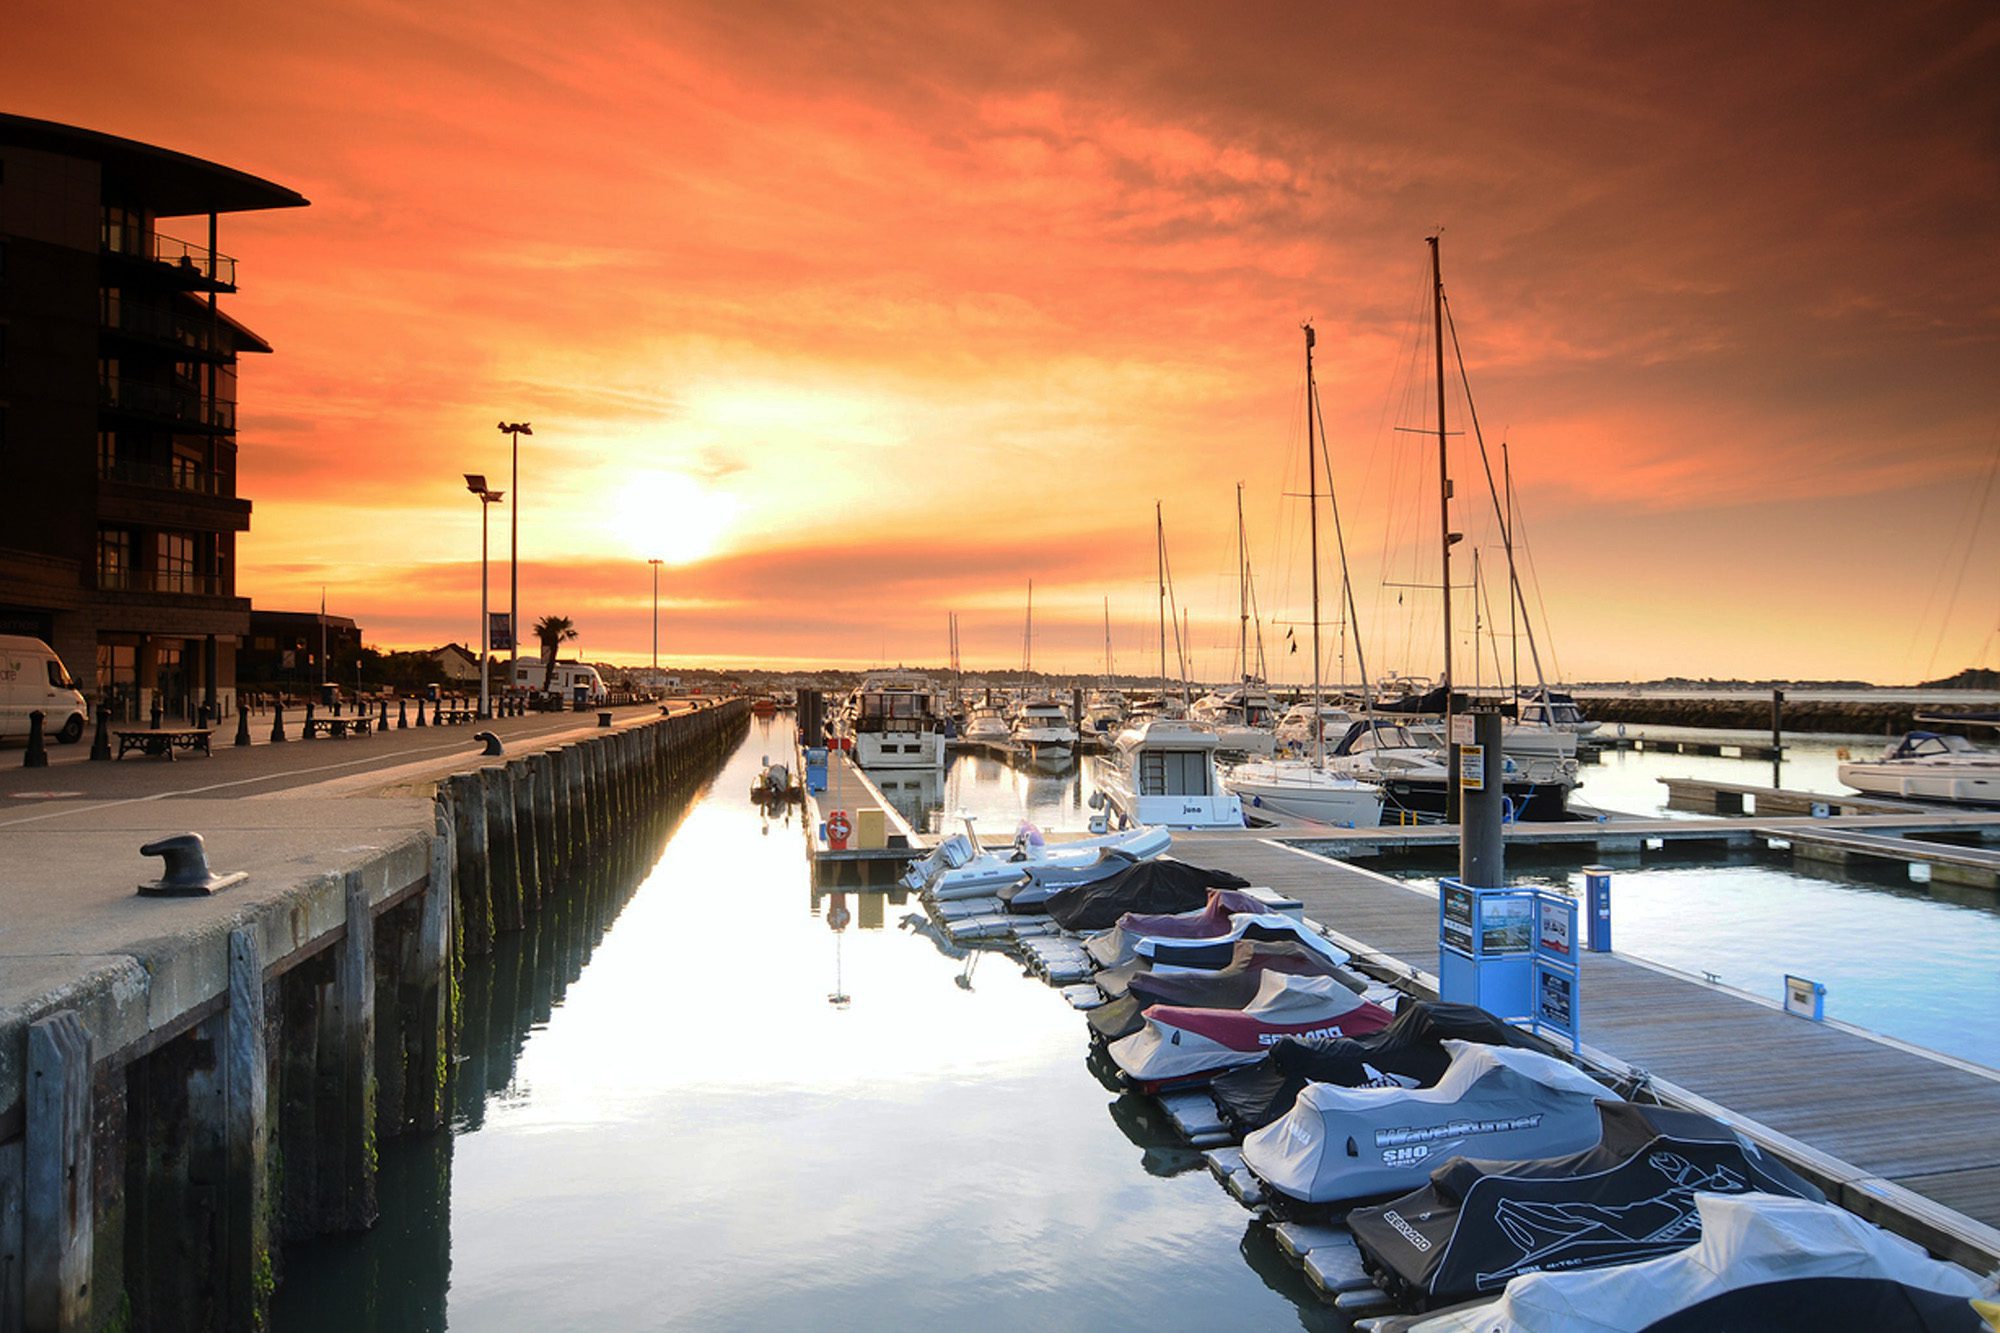 Poole Quay at Sunset